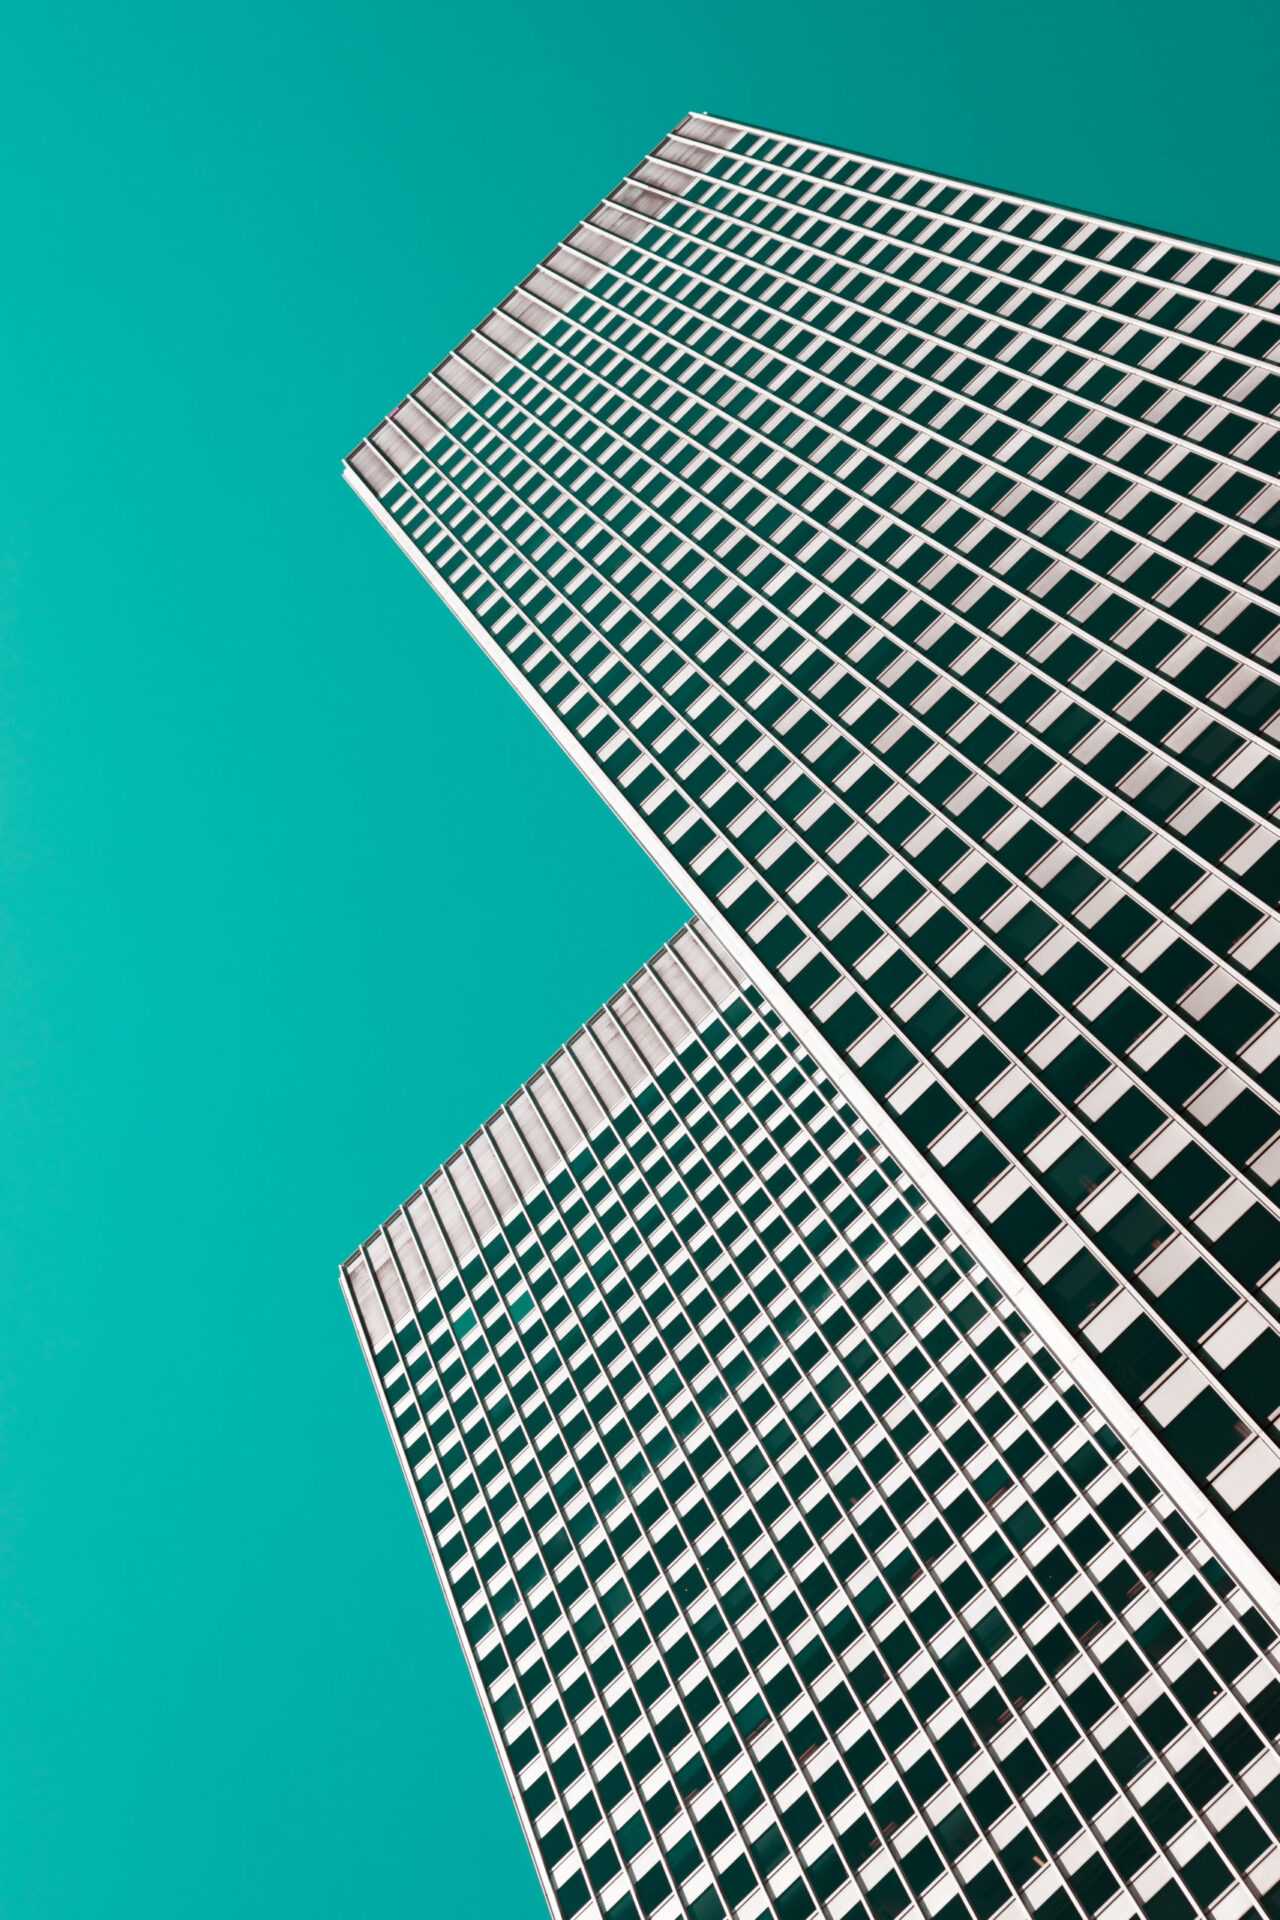 Two tall buildings on a teal background viewed from below